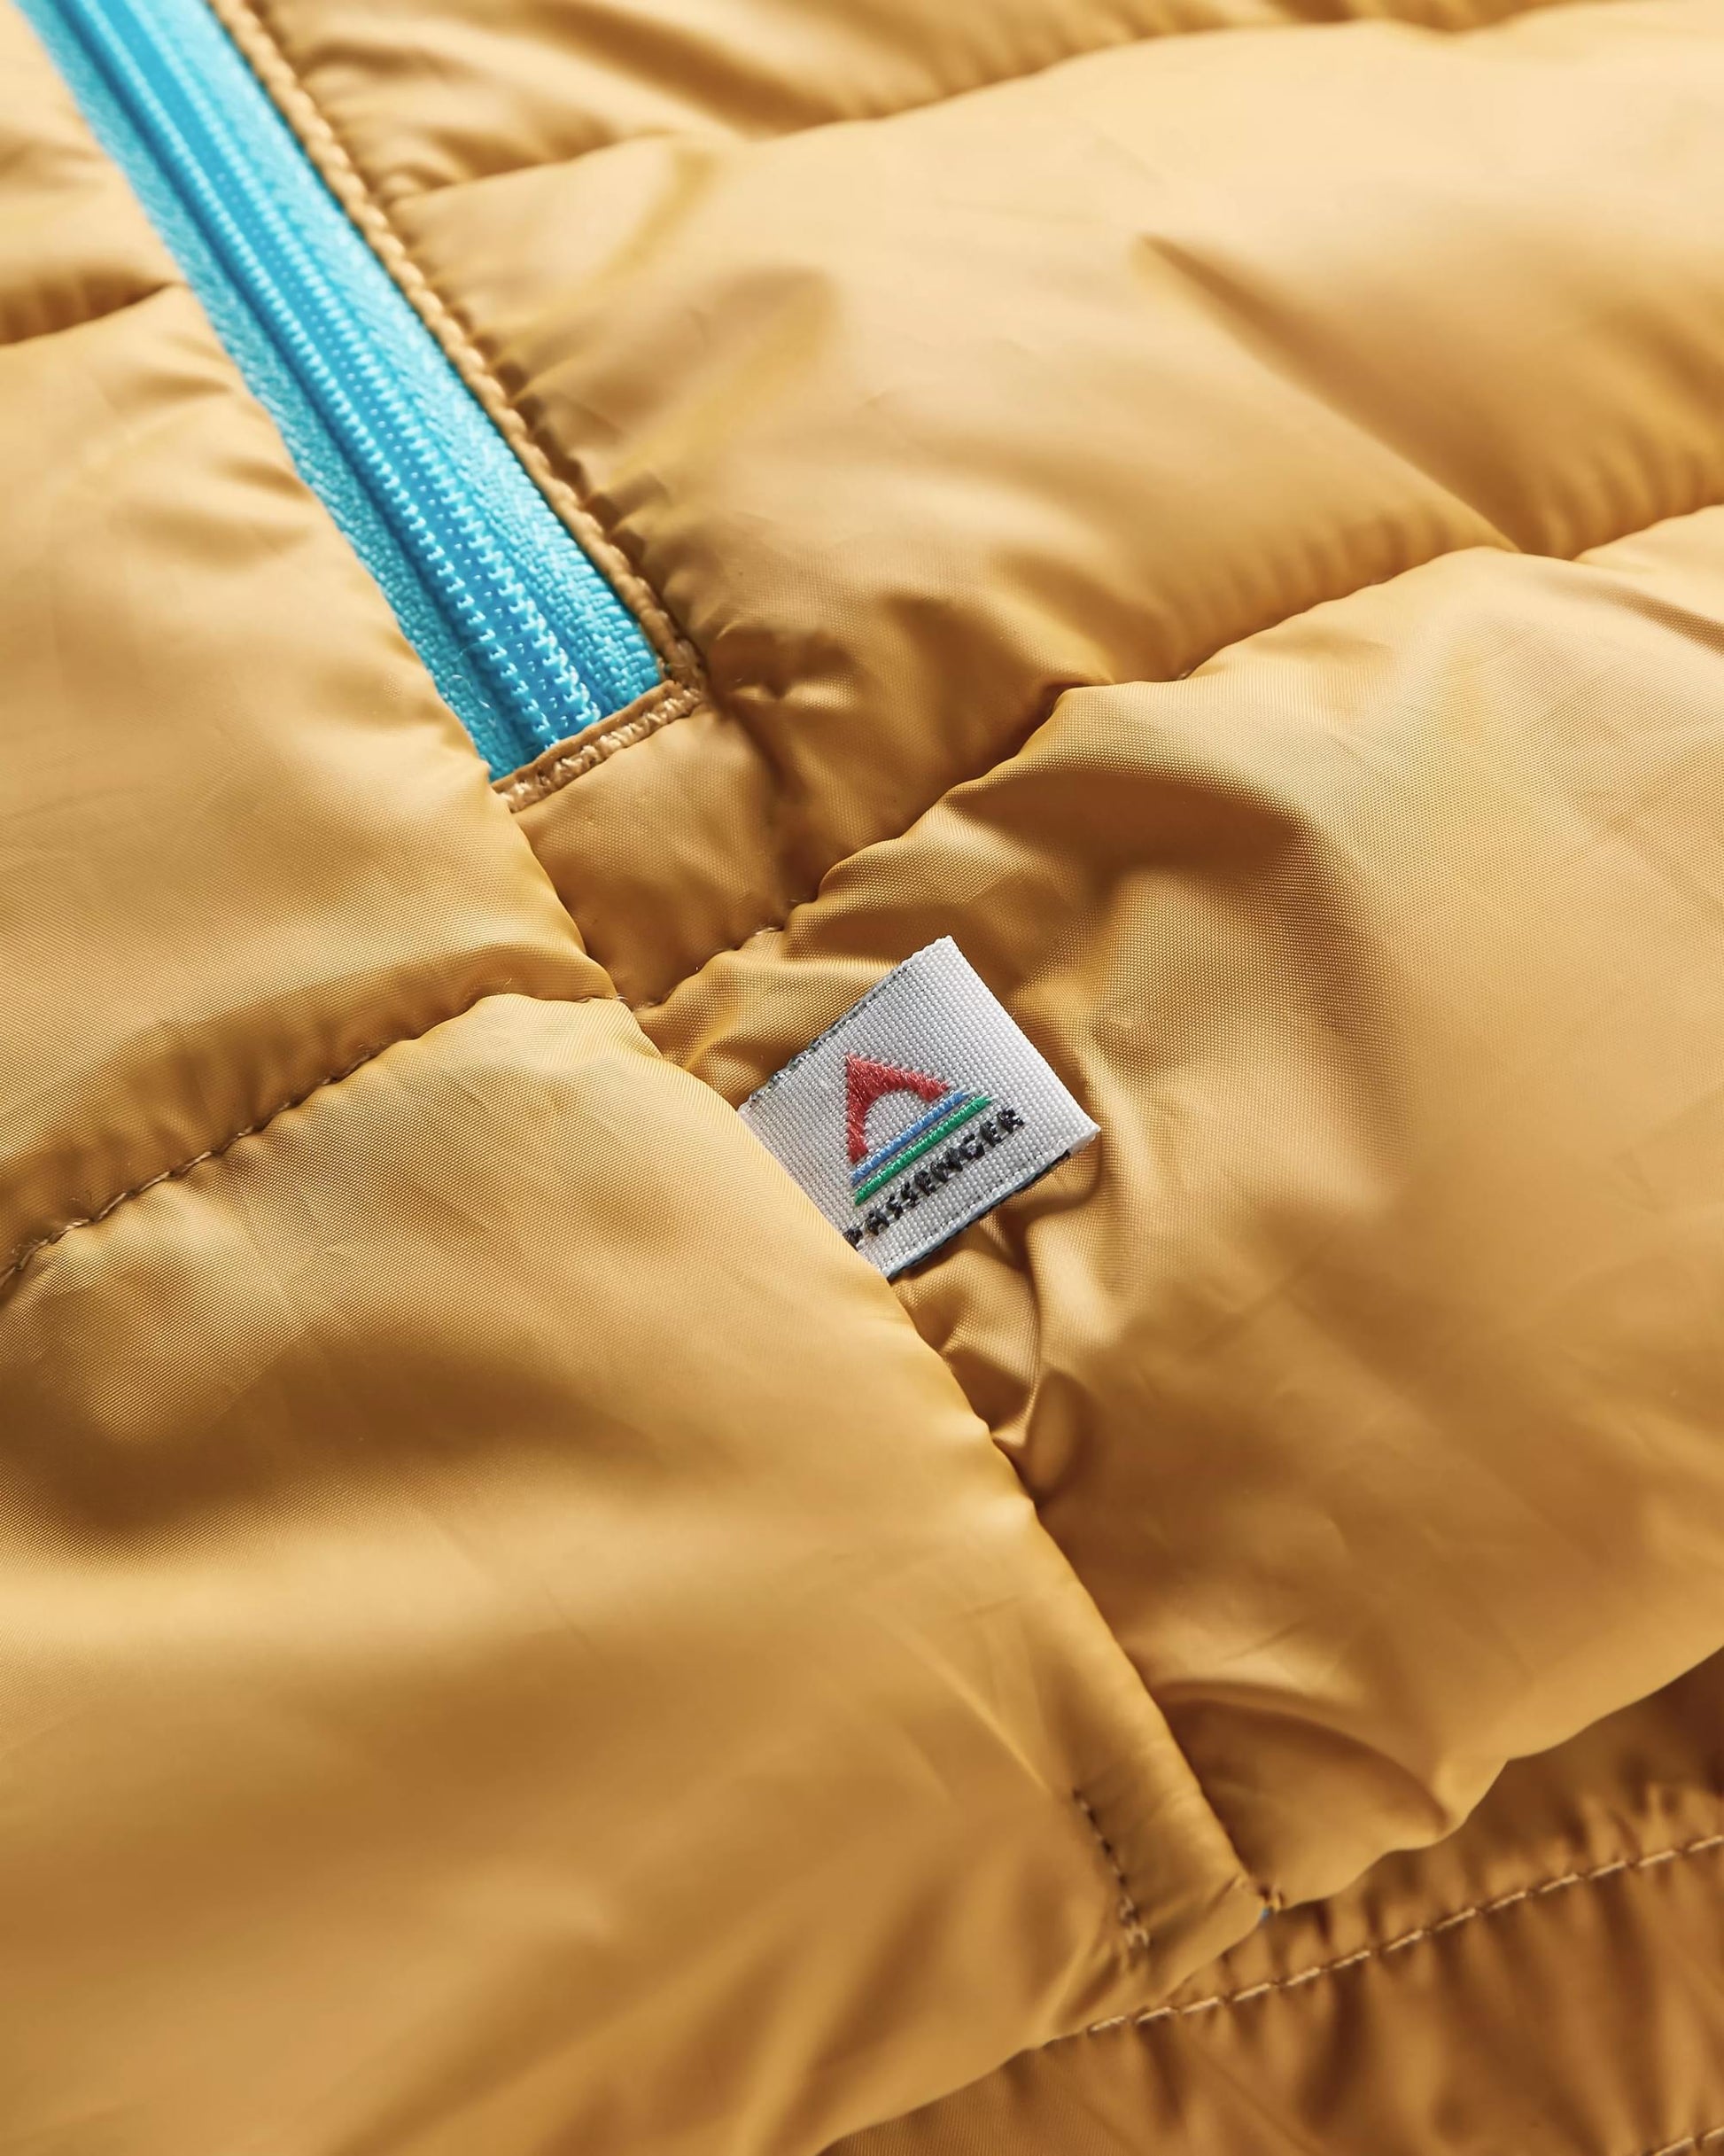 Pow Recycled 2.0 Insulated Jacket - Mustard Gold